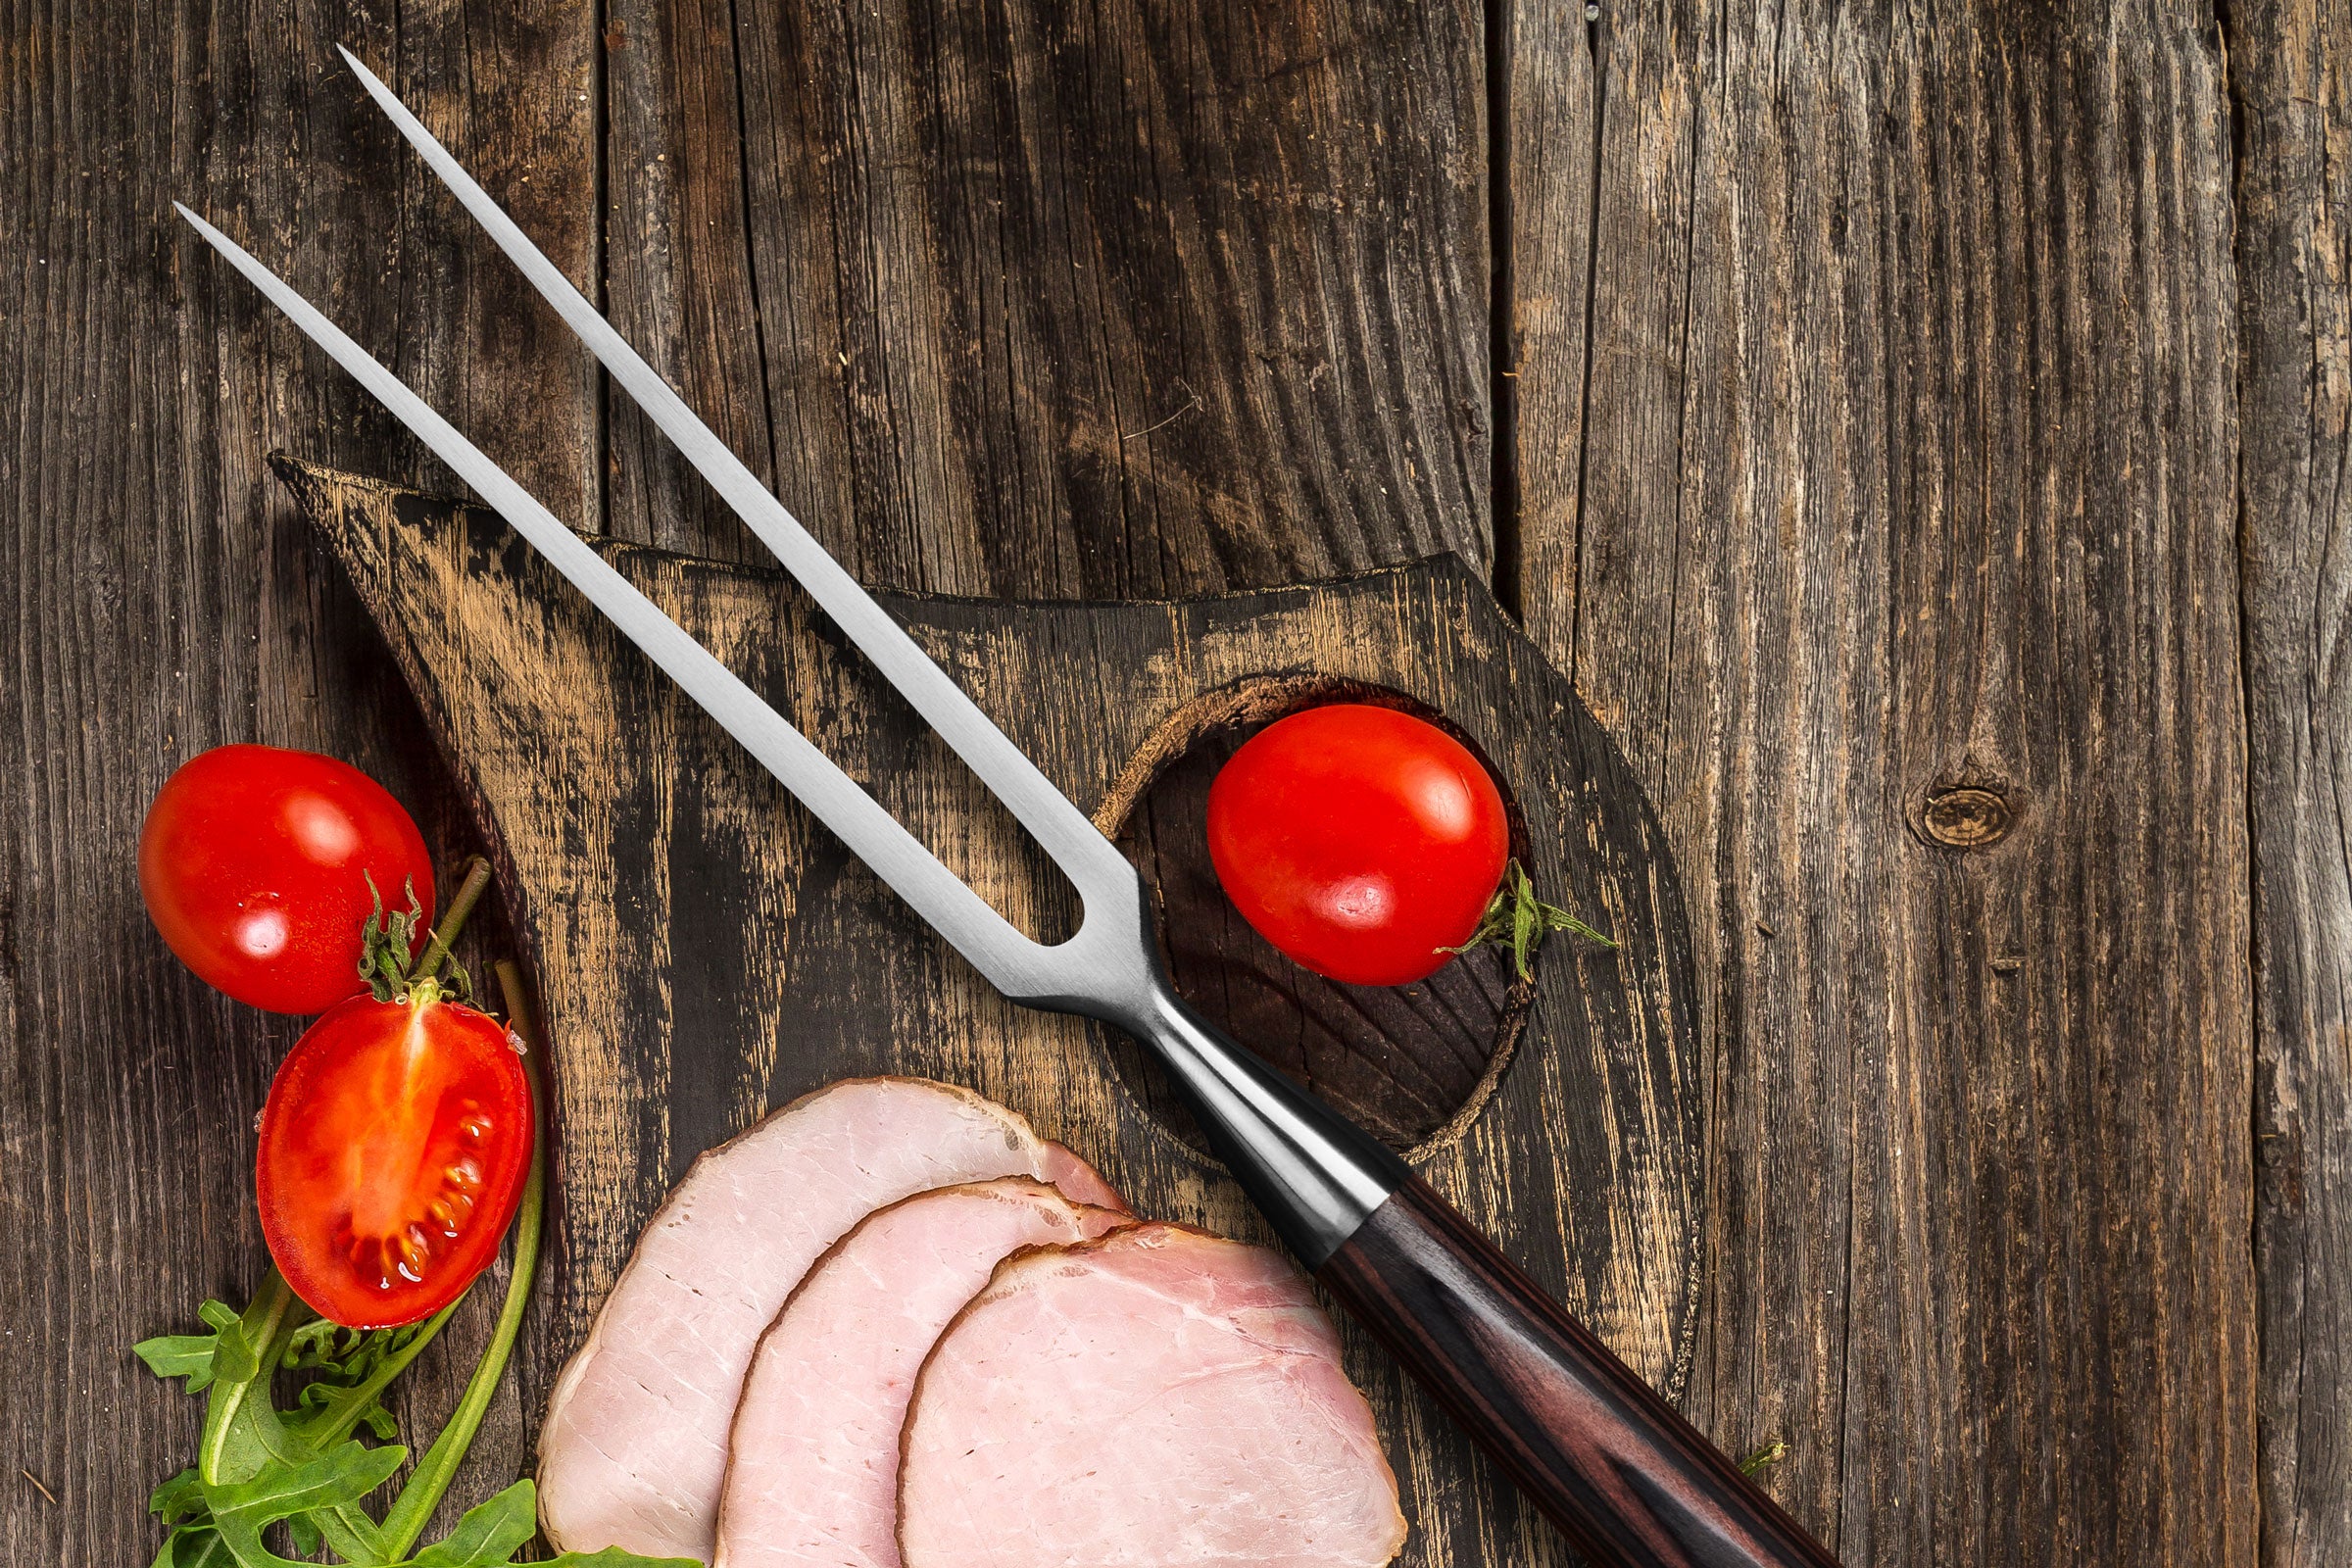 The Samurai Carving Meat Fork with slices of turkey, and cherry tomatoes.